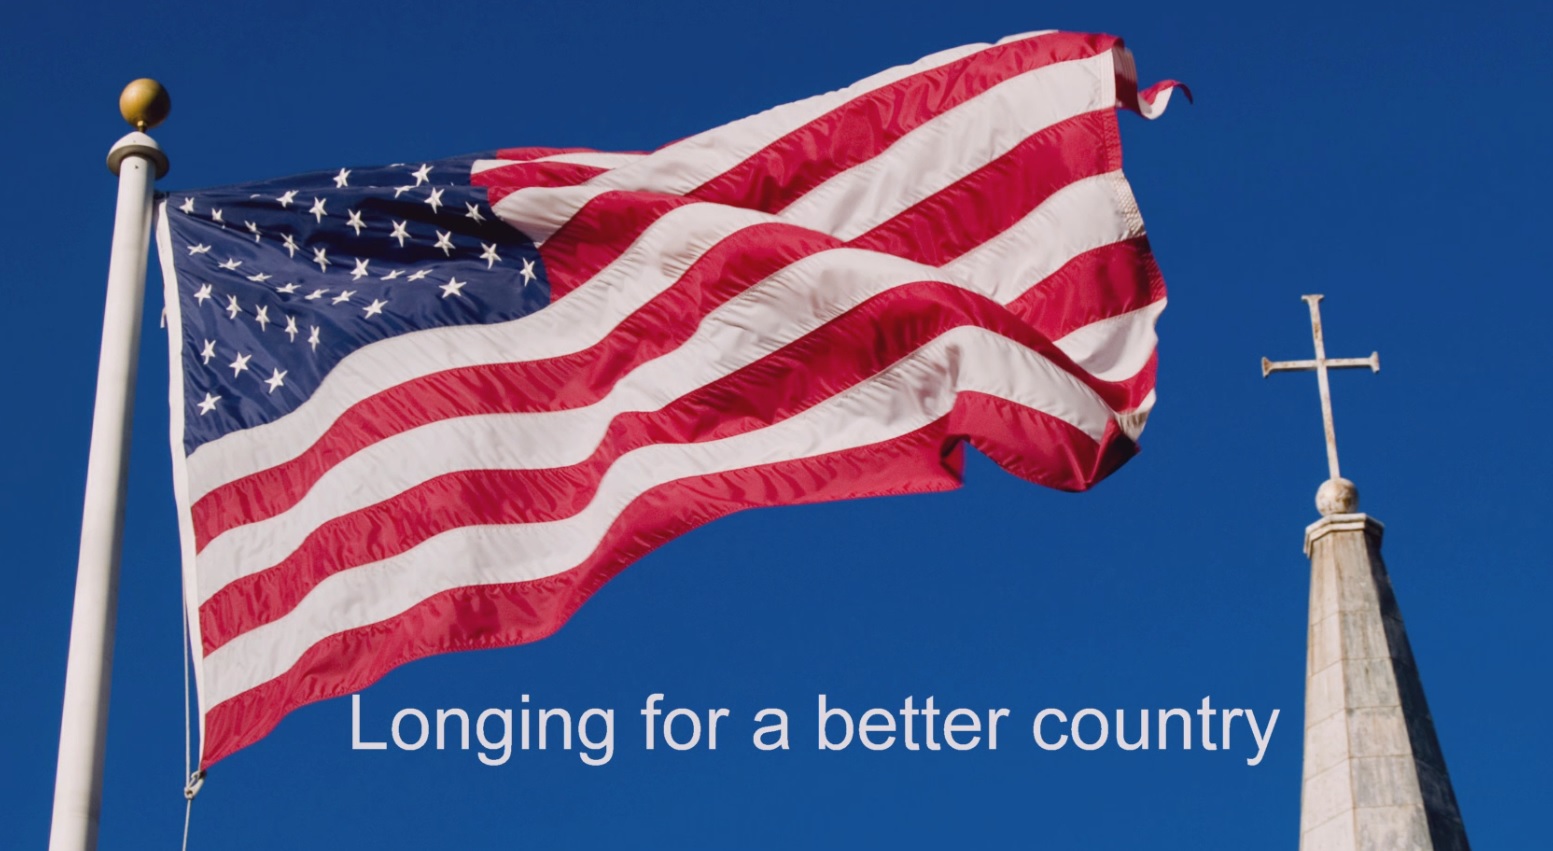 Longing for a better country